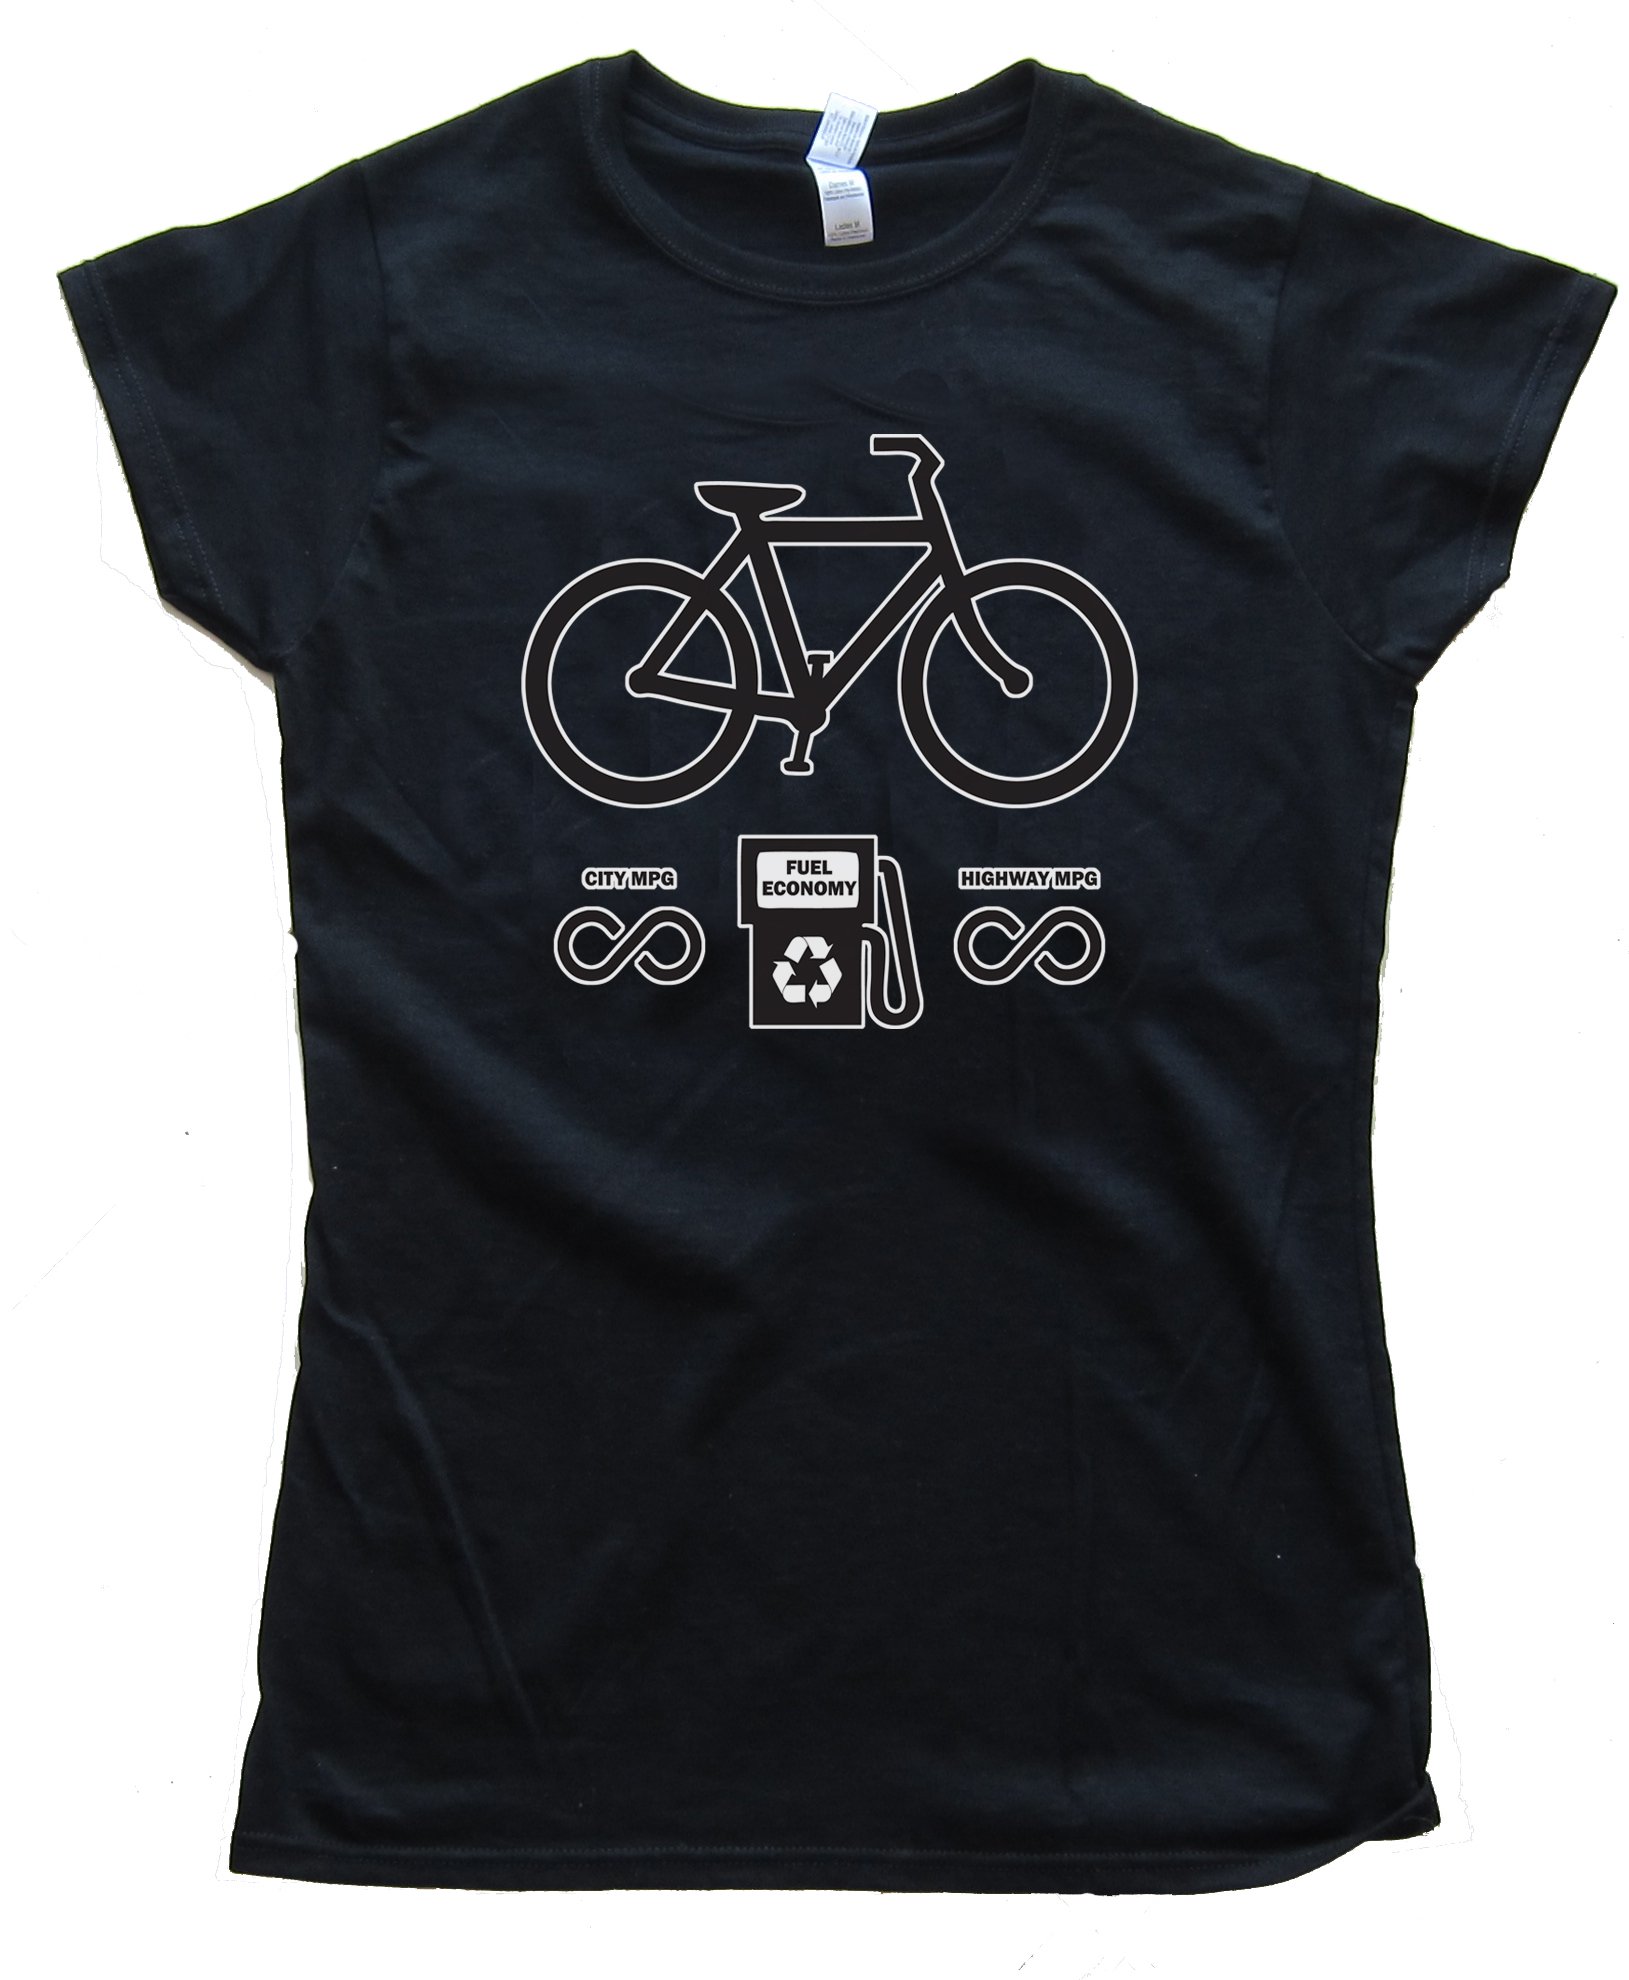 Womens Bicycle Fuel Economy Unlimited Tee Shirt